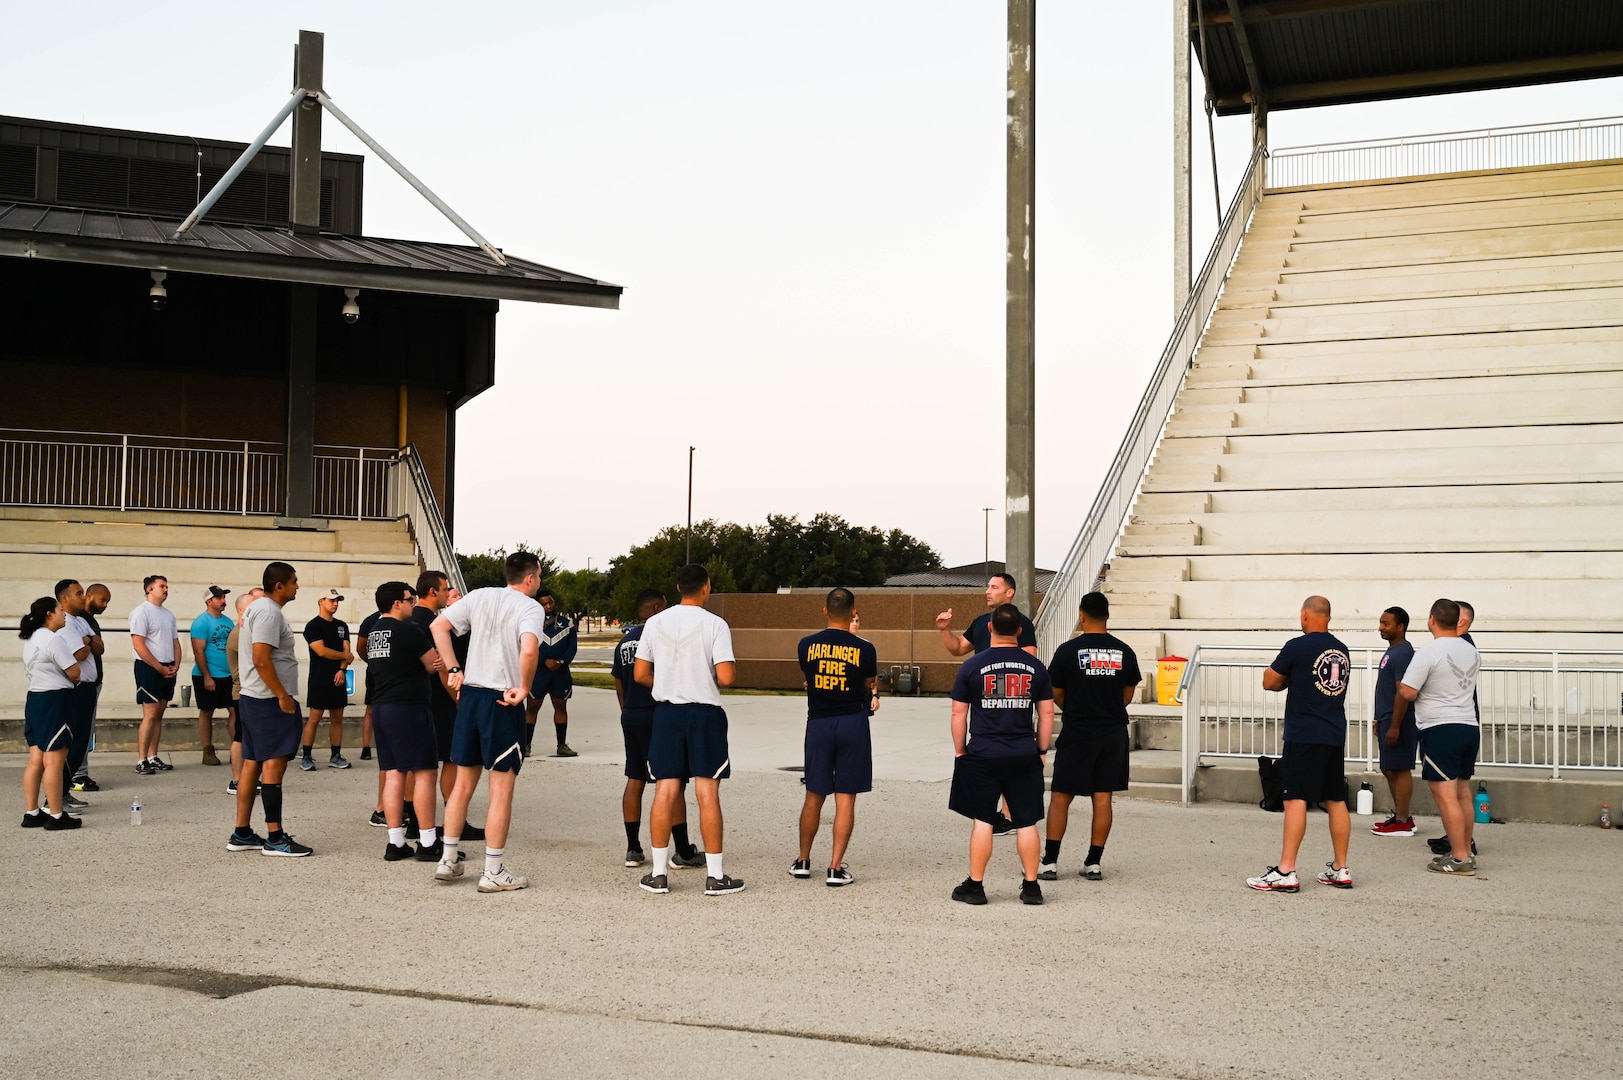 Senior Master Sgt. Joshua Moss, 433rd Civil Engineering Squadron Fire Chief, briefs Airmen before starting the unit’s annual 9/11 Memorial Stair Climb outside the Pfingston Reception Center on Joint Base San Antonio-Lackland, Texas on Sep. 10, 2023.